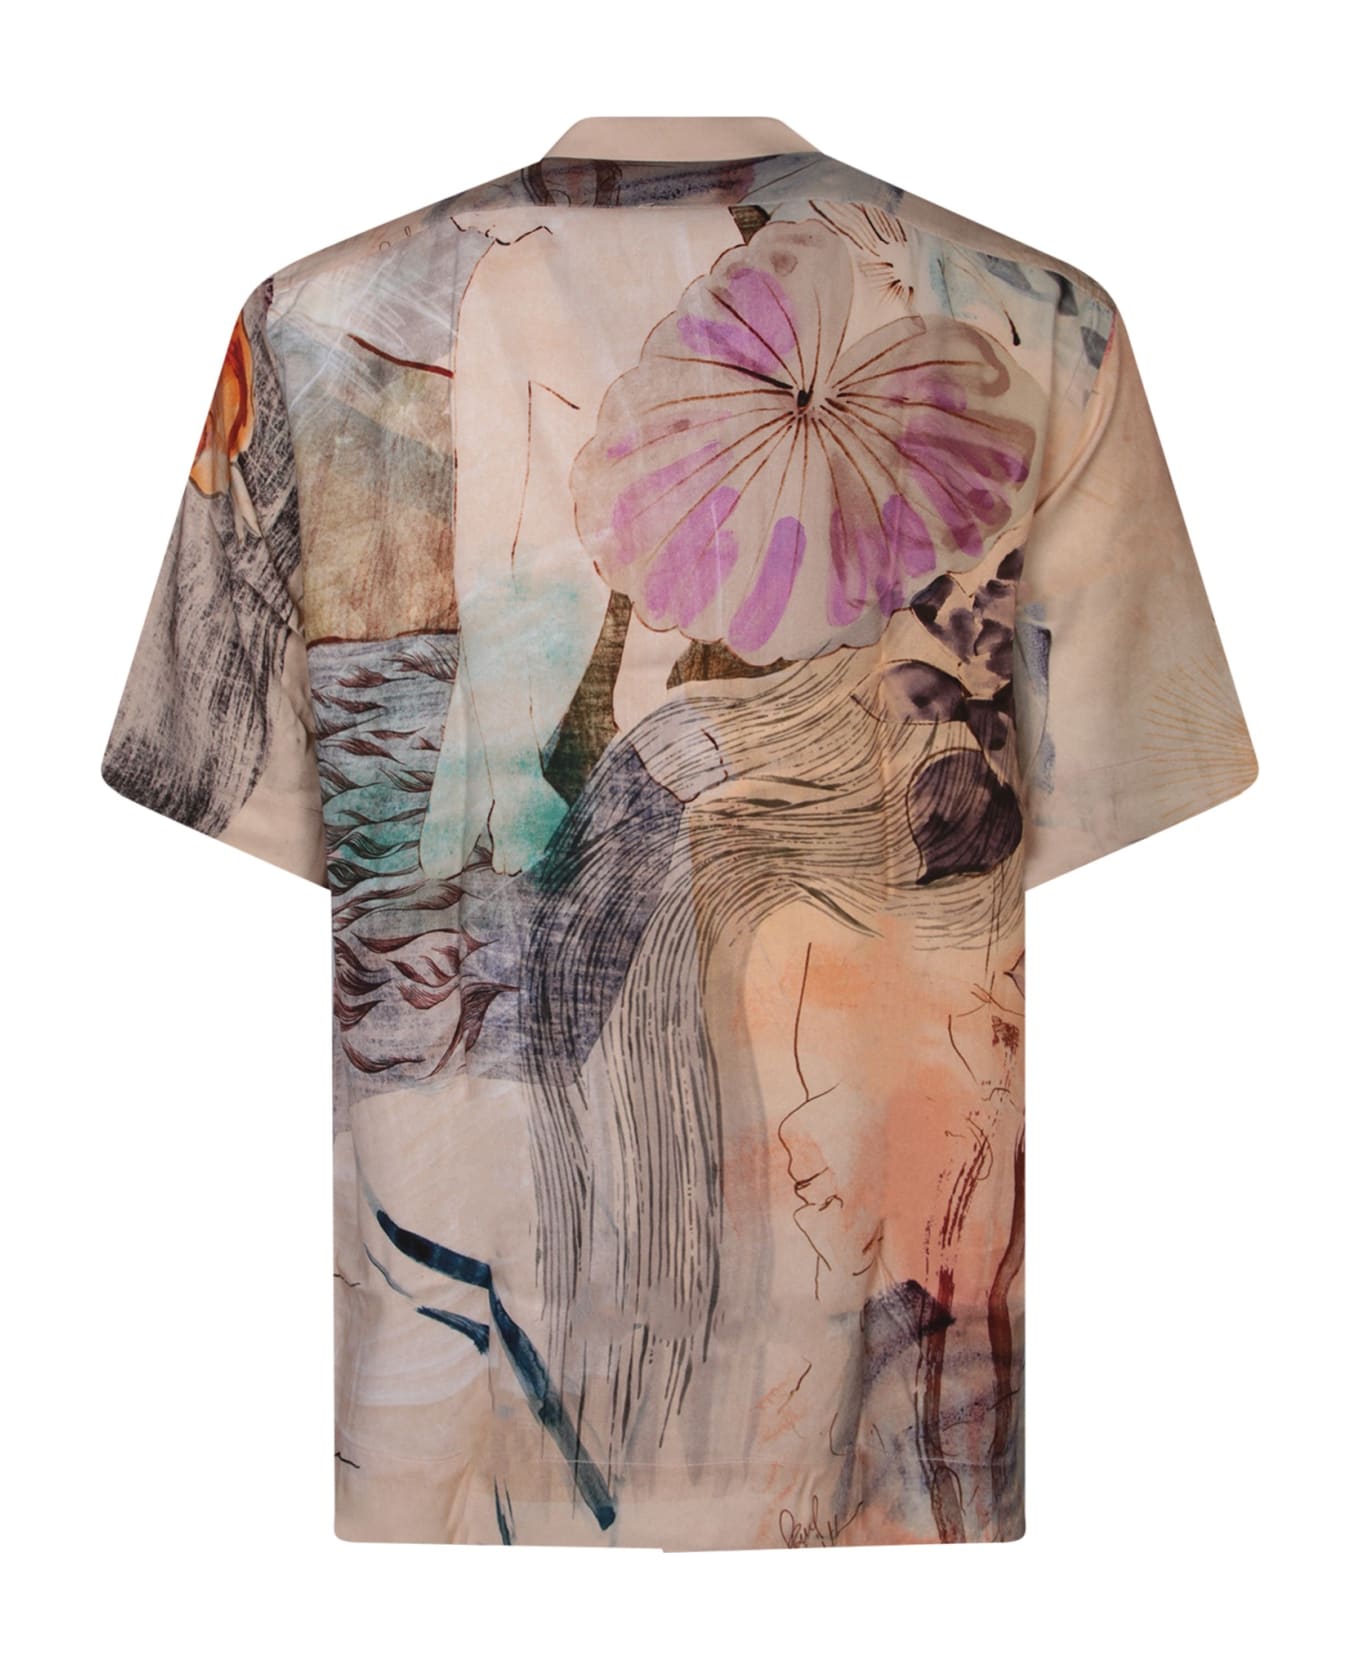 Paul Smith Graphic Printed Short-sleeved Shirt - Beige シャツ